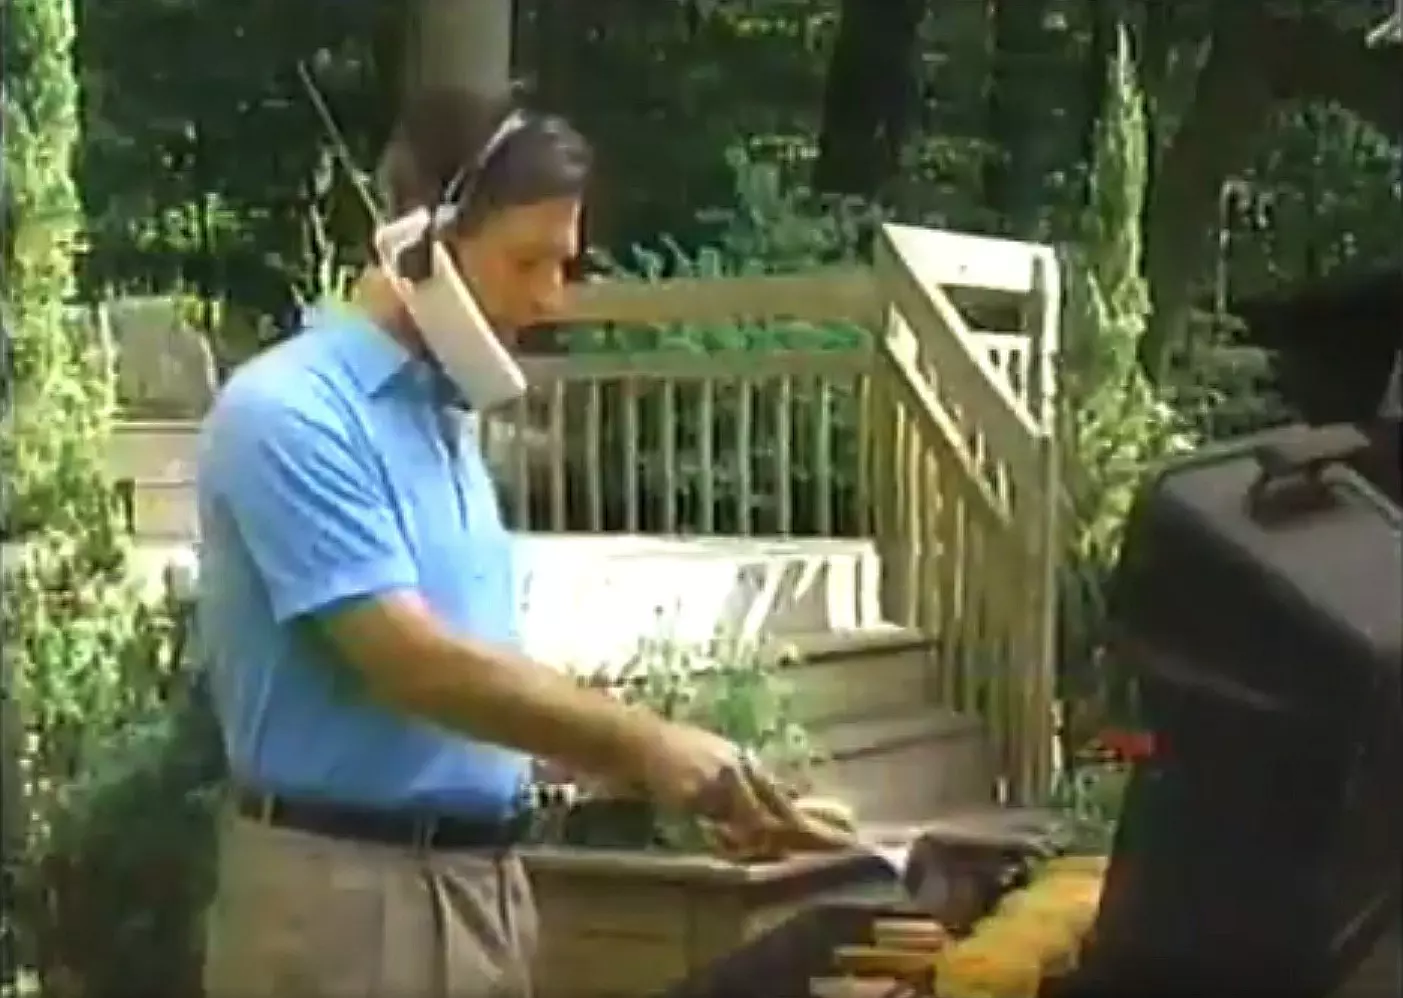 Hands-Free Telephone Headset Commercial From 1993